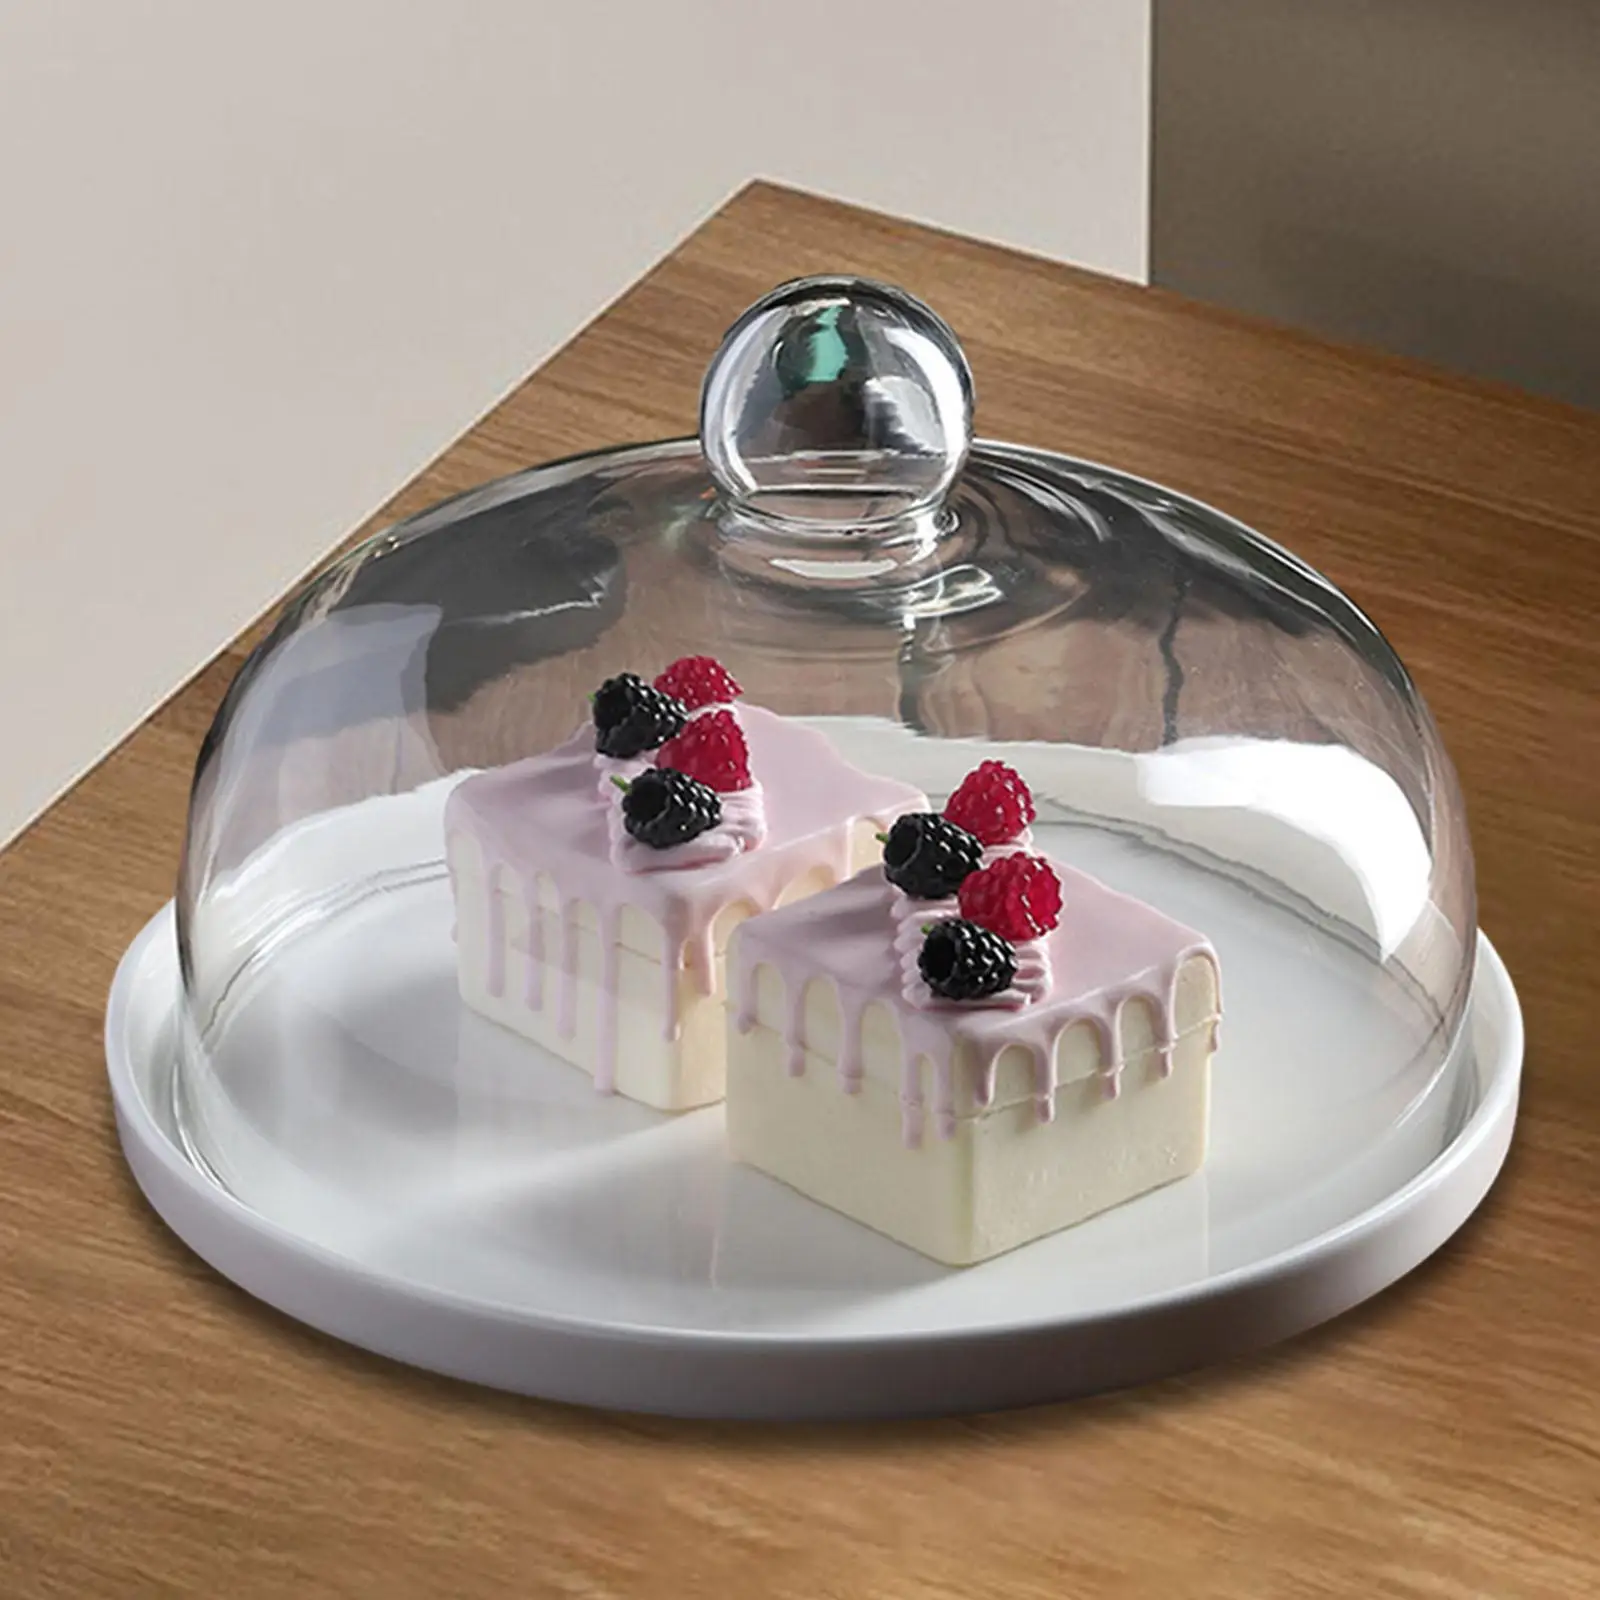 Cake Stand with Glass Cover Fruit Plate Pastry Display Dessert Display for Festive Party Dessert Shops Hotels Holiday Wedding